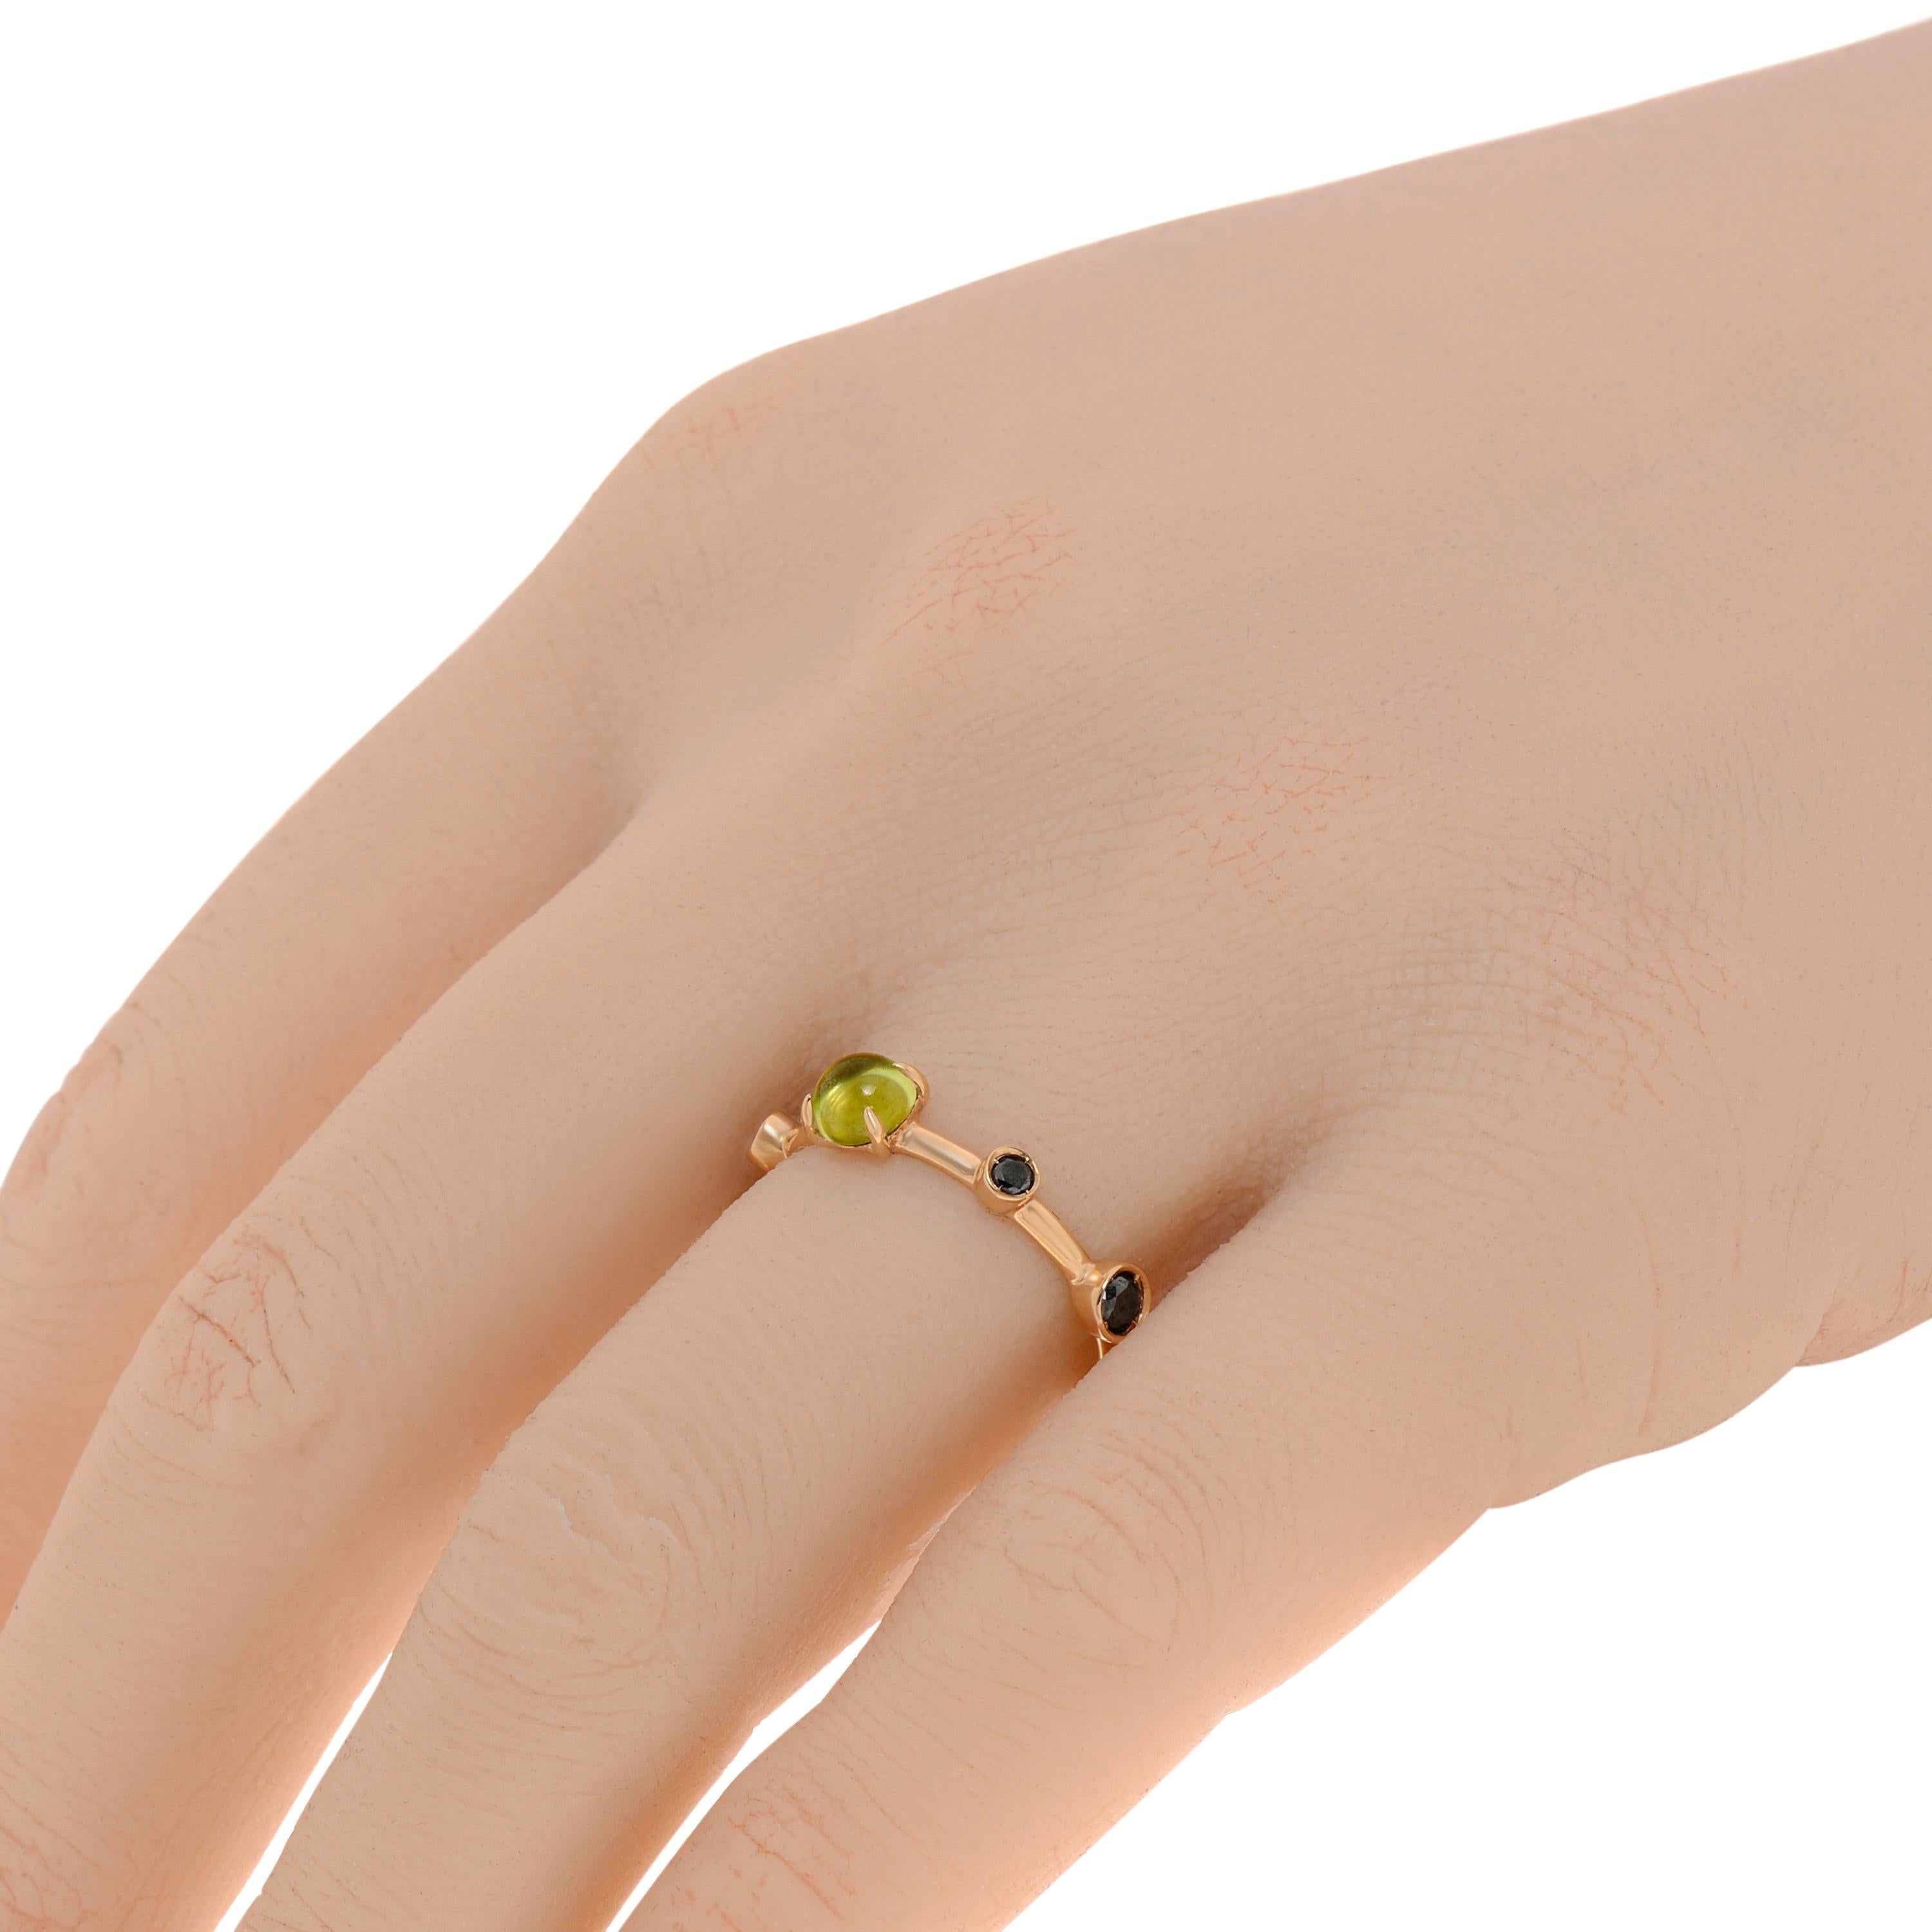 Damiani 18K rose gold gemstone ring features a thin band surrounded with green and black peridot. The ring size is 7 (54.4). The band width is 1.5mm. The total weight is 2.3g.
